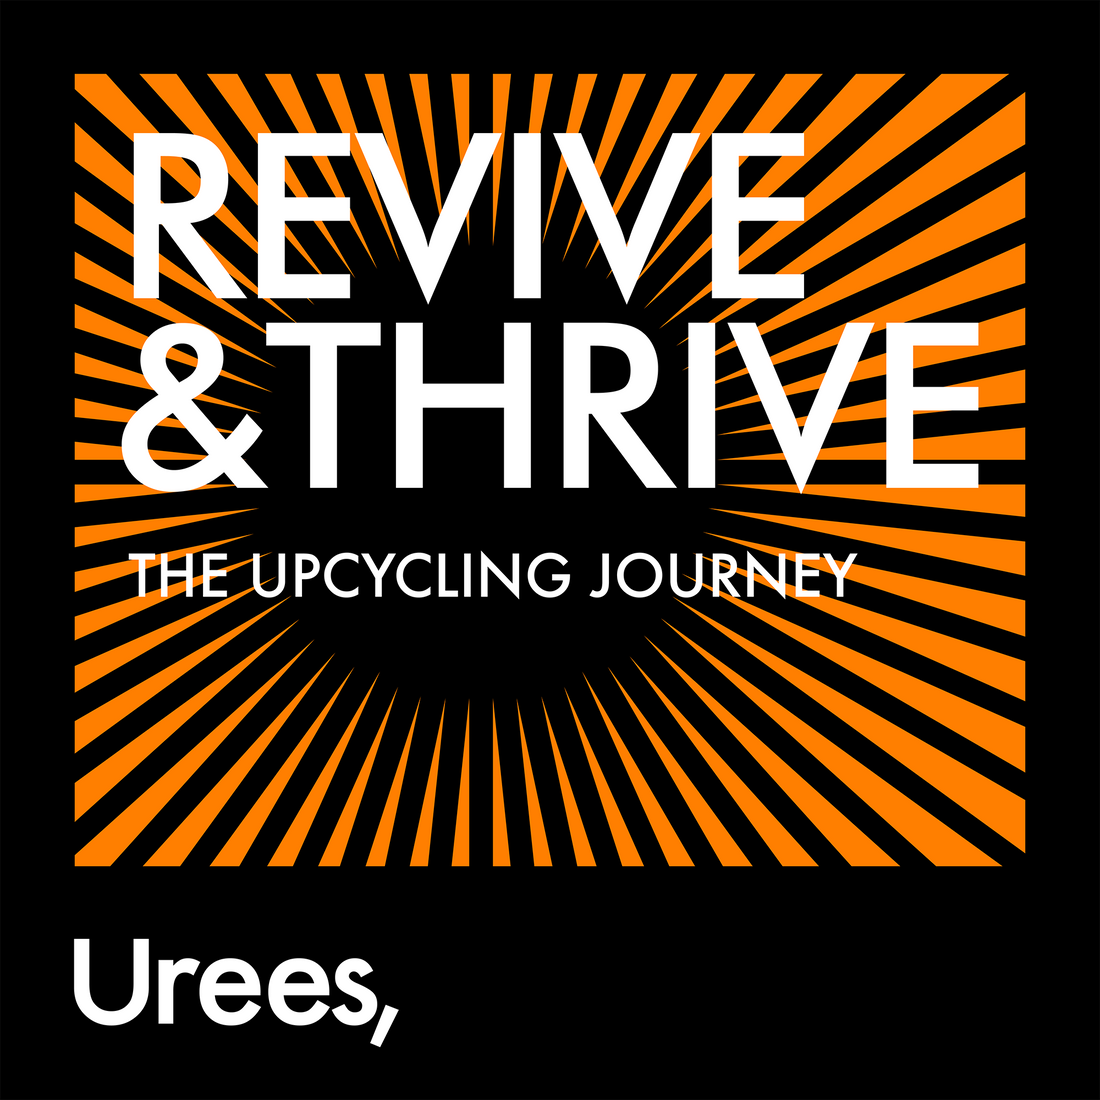 Introducing Podcast Series! "Revive & Thrive: The Upcycling Journey"